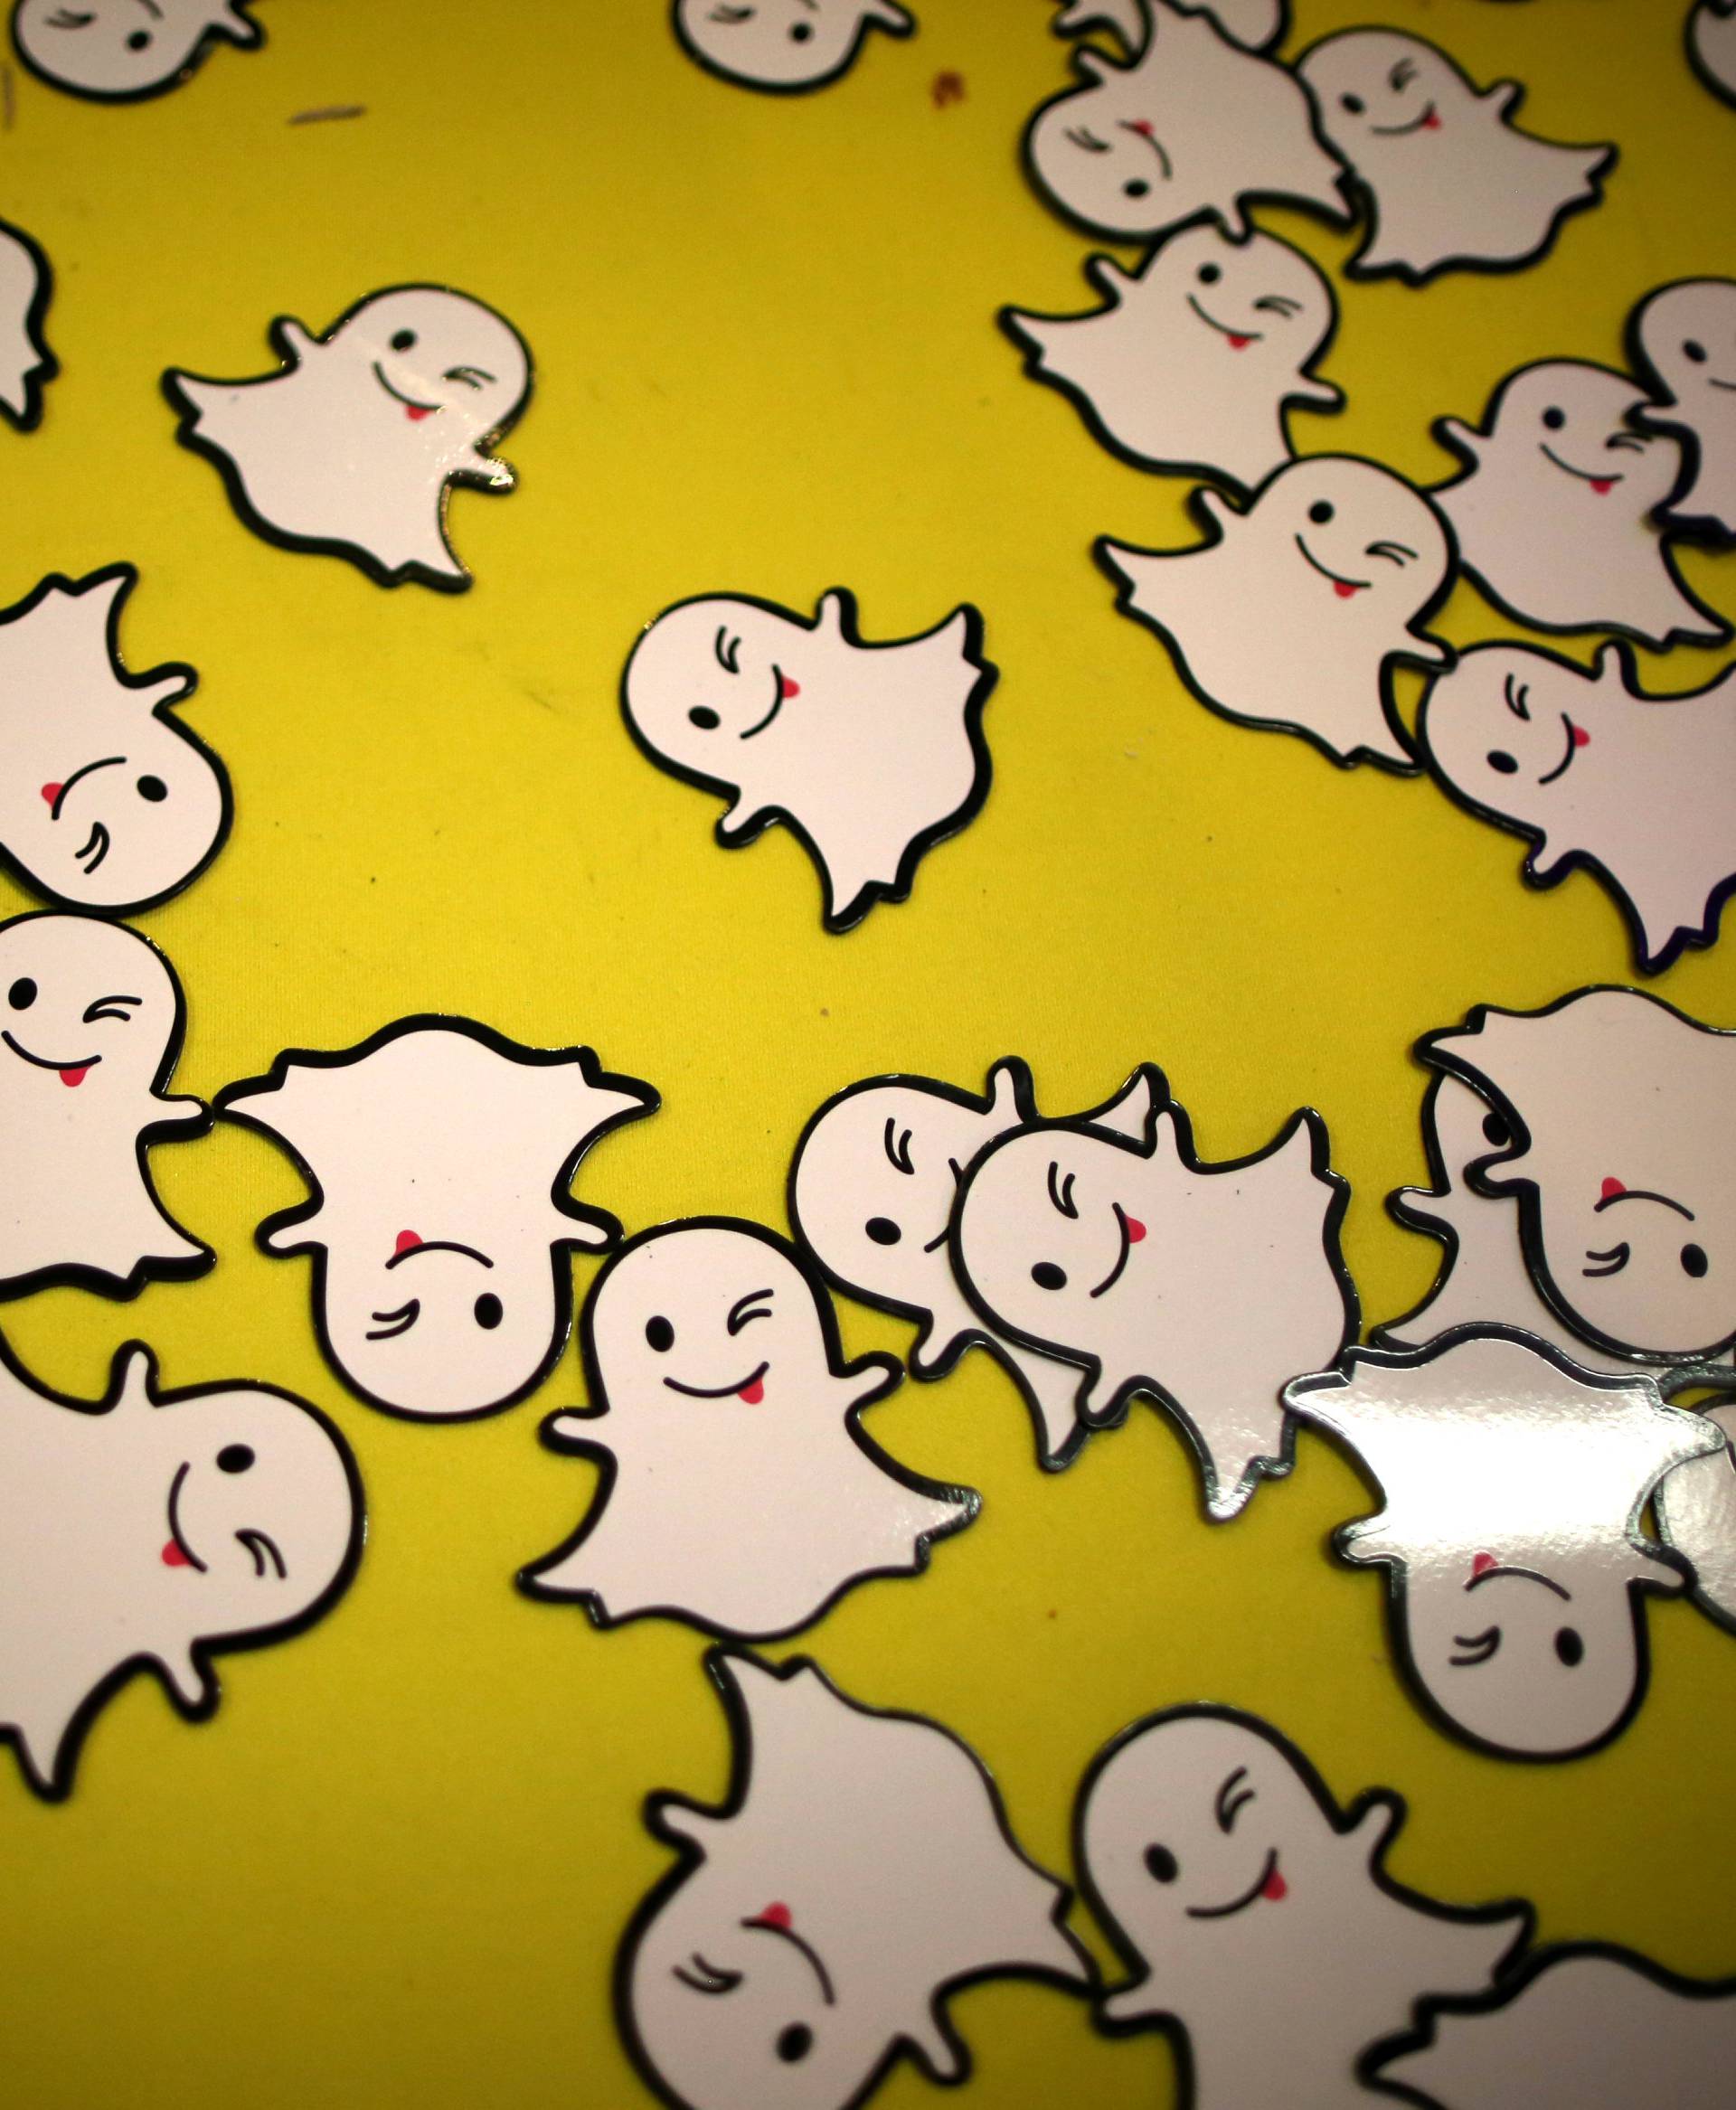 The logo of messaging app Snapchat is seen at a booth at TechFair LA, a technology job fair, in Los Angeles